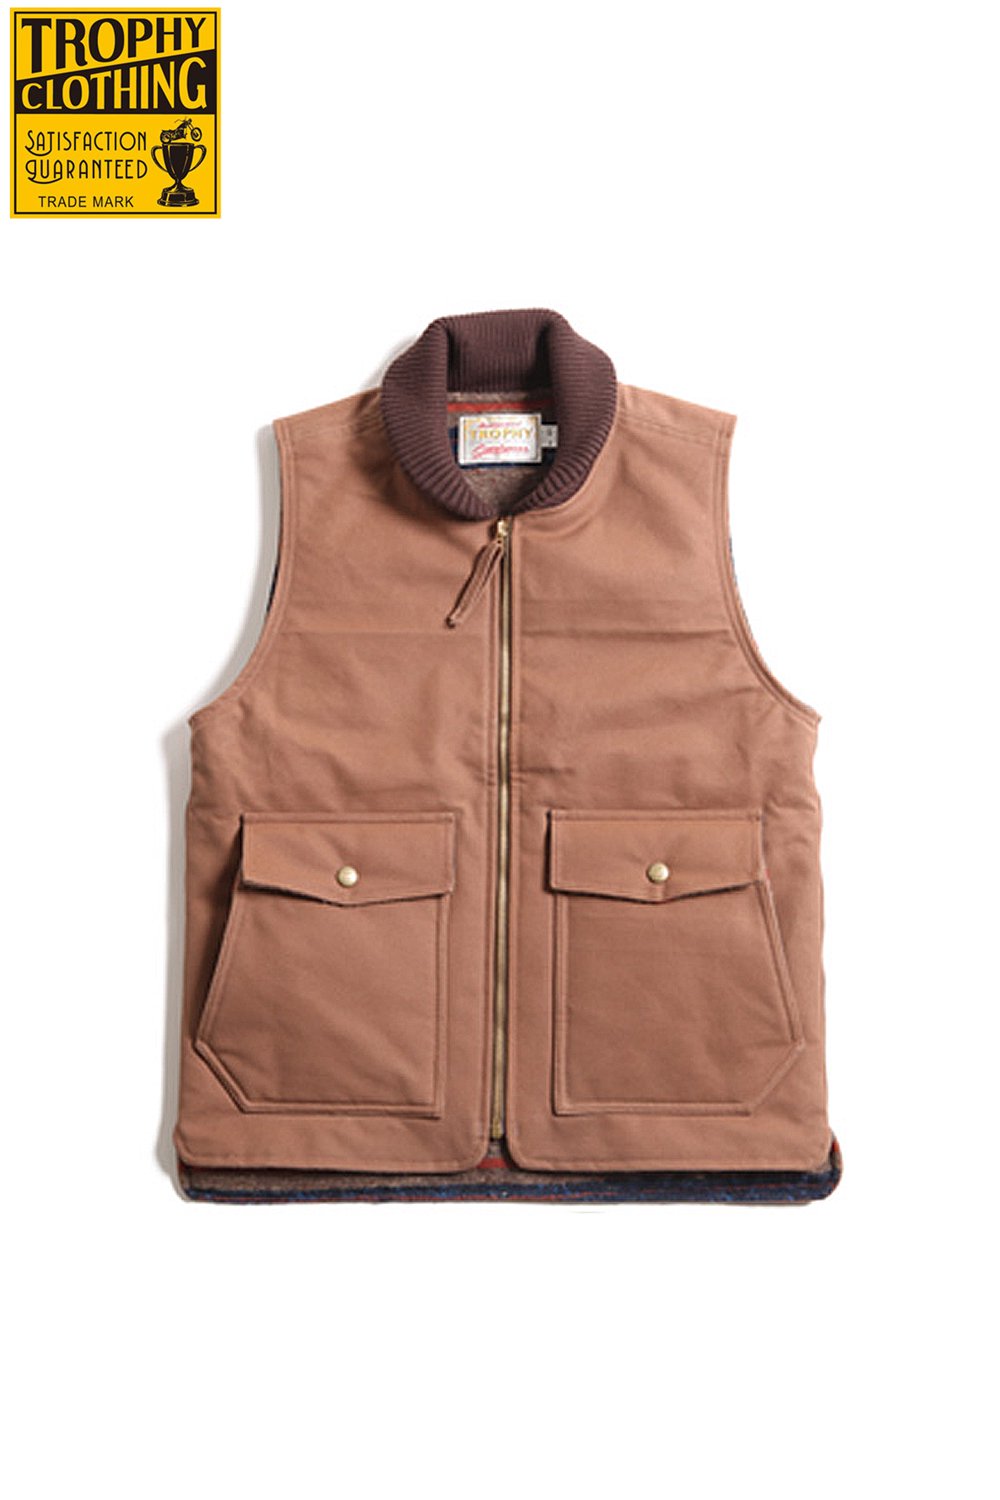 TROPHY CLOTHING(トロフィークロージング) ストームベスト OILED DUCK STORM VEST TR18AW-303